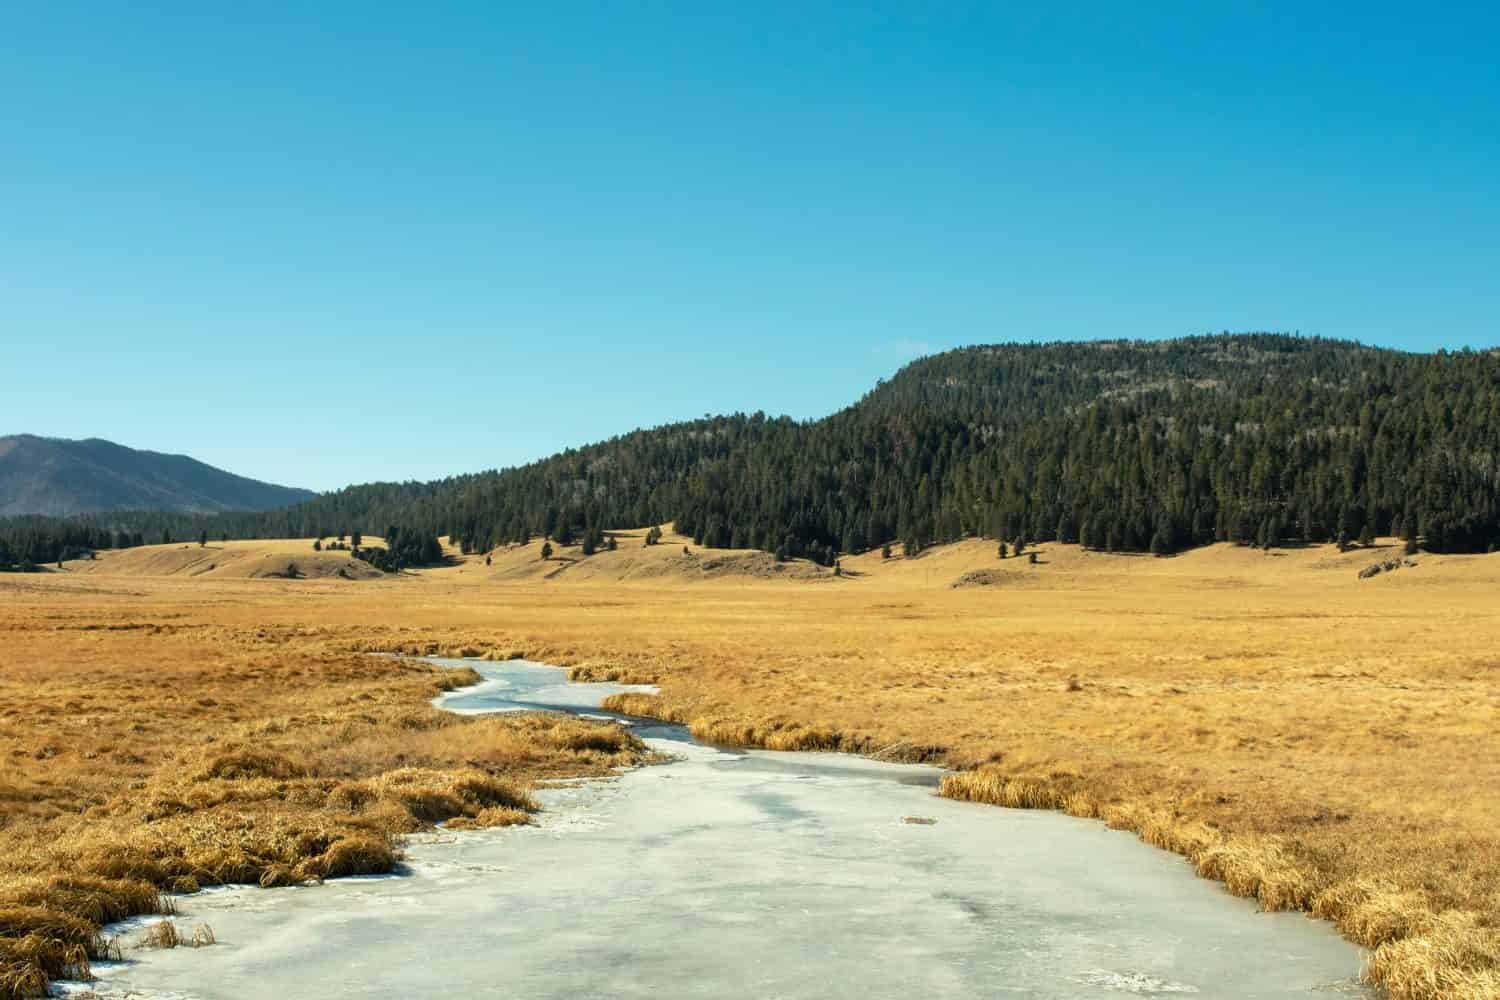 Valles Caldera National Preserve during winter, with the East Fork Jemez River and tussock grasses in the foreground